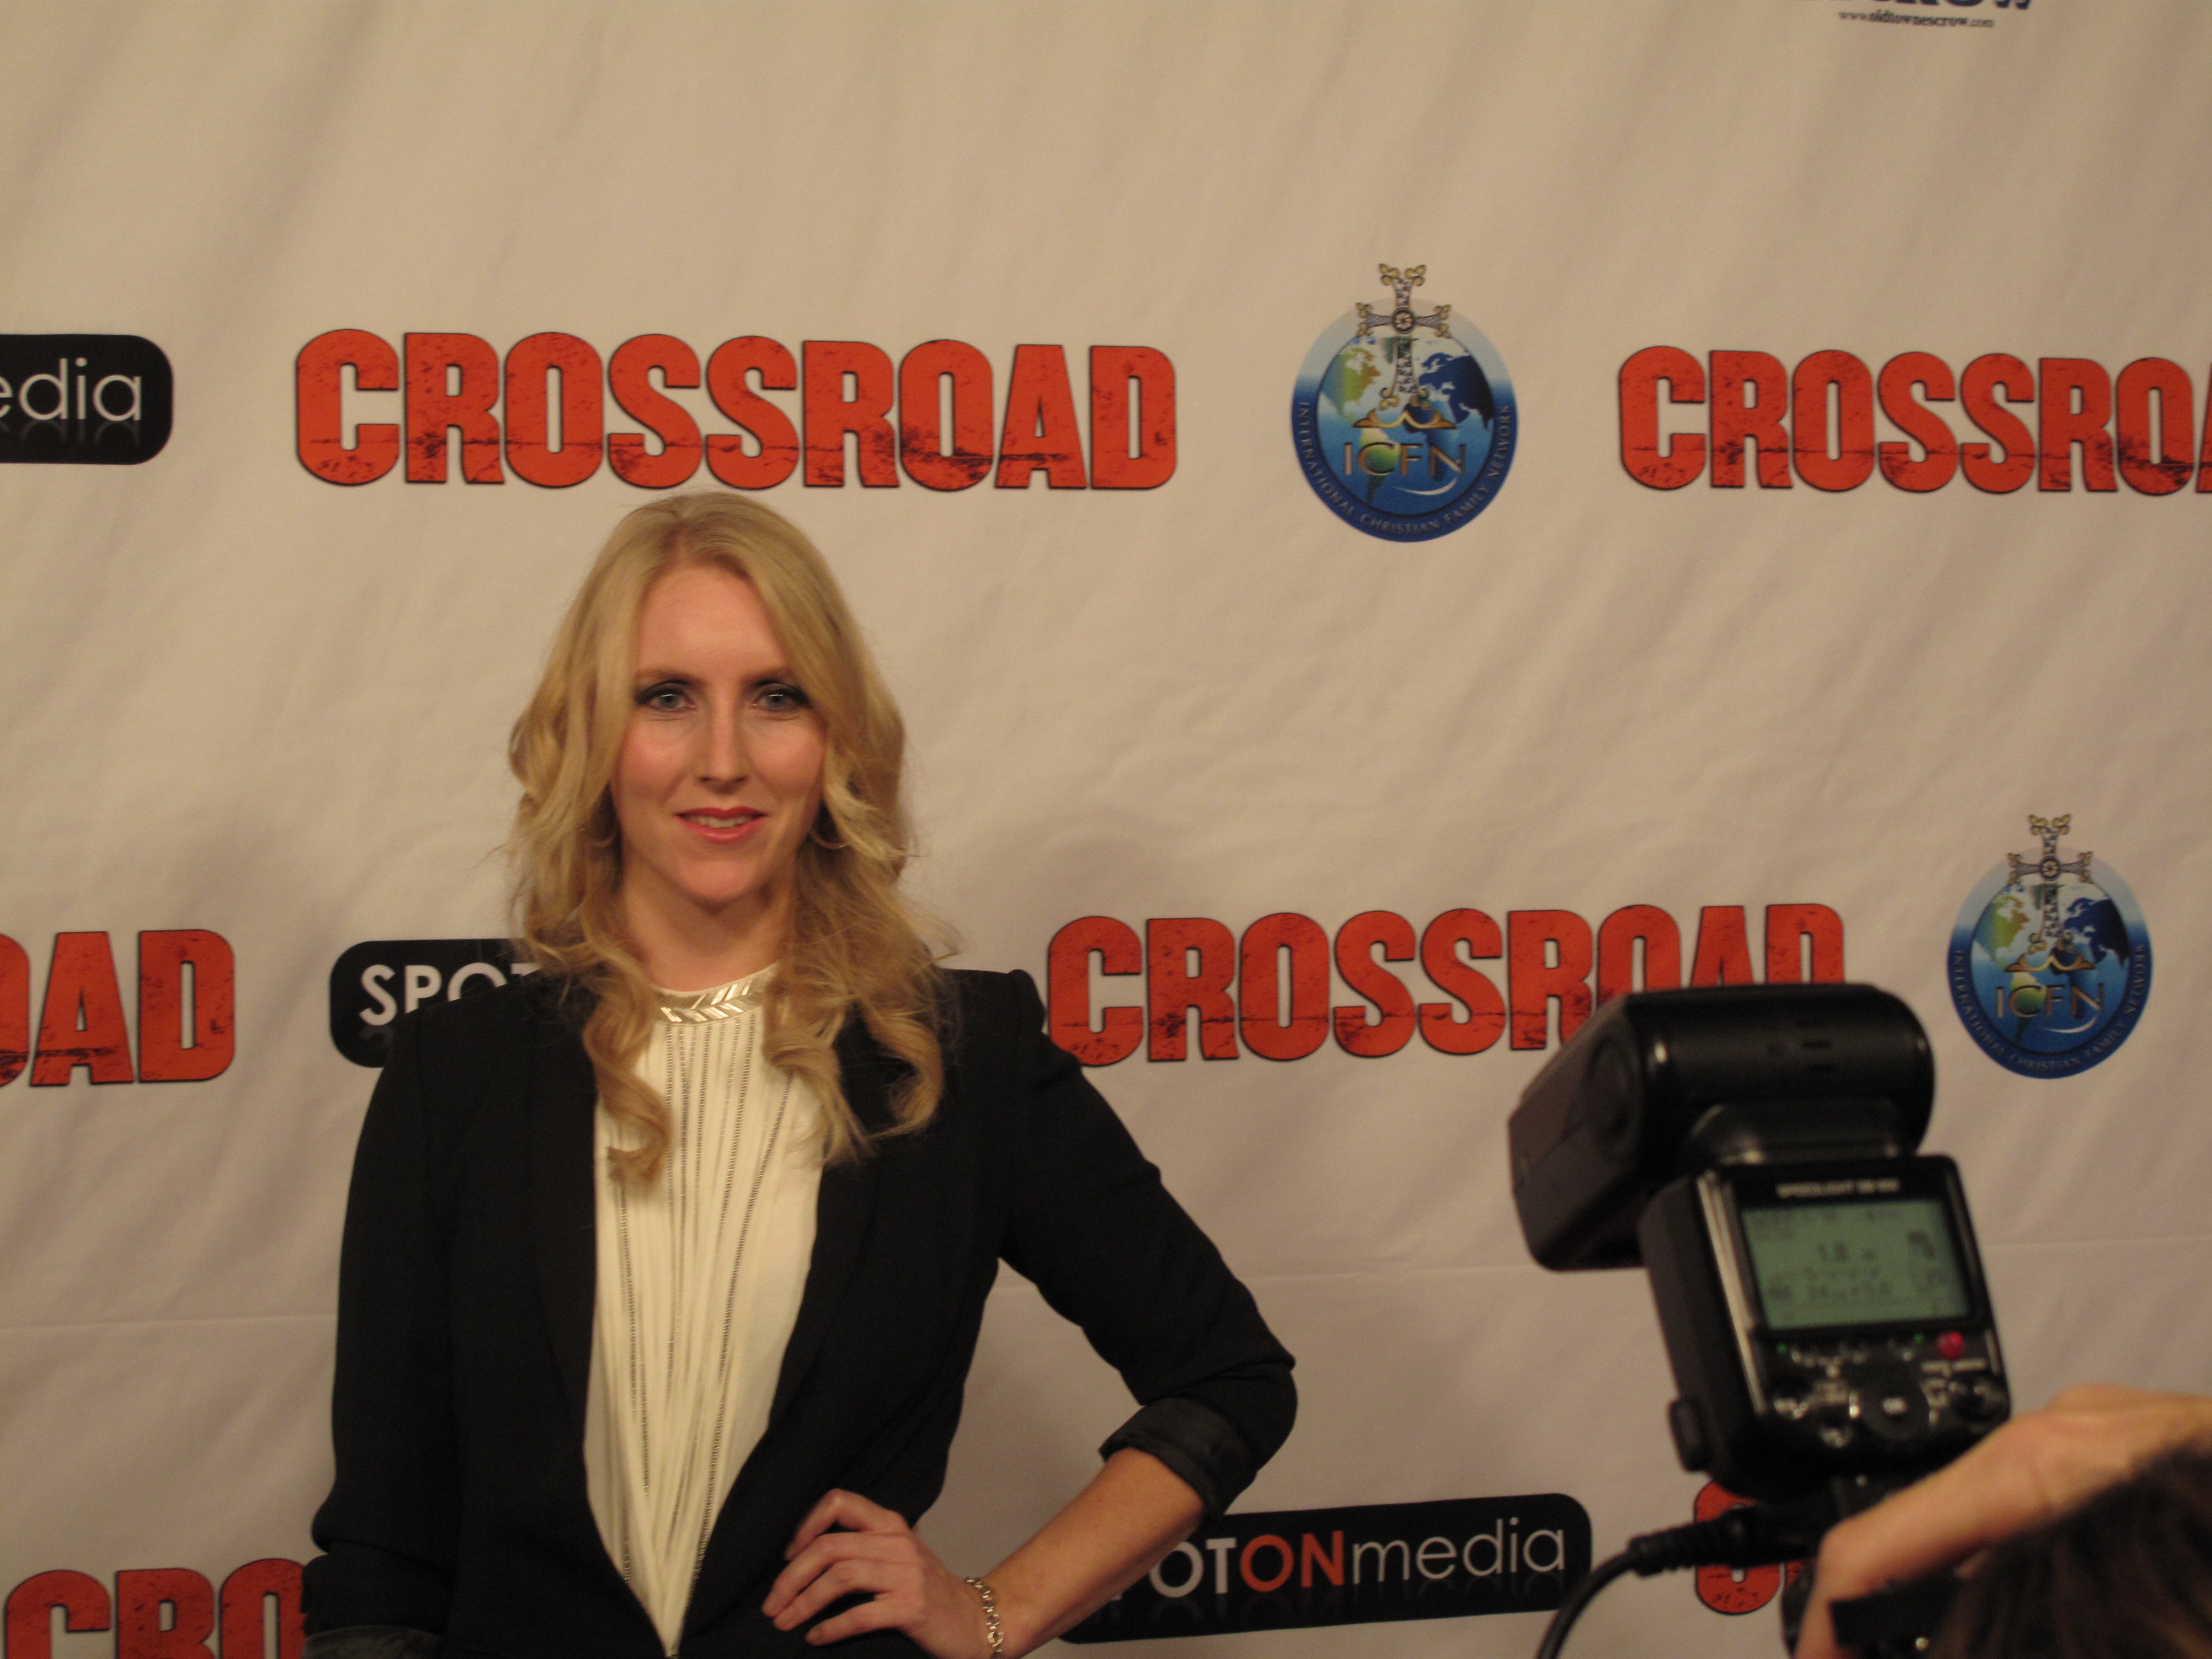 Actress Lindsay Lucas-Bartlett arrives at the Crossroad Premiere in Los Angeles, California.